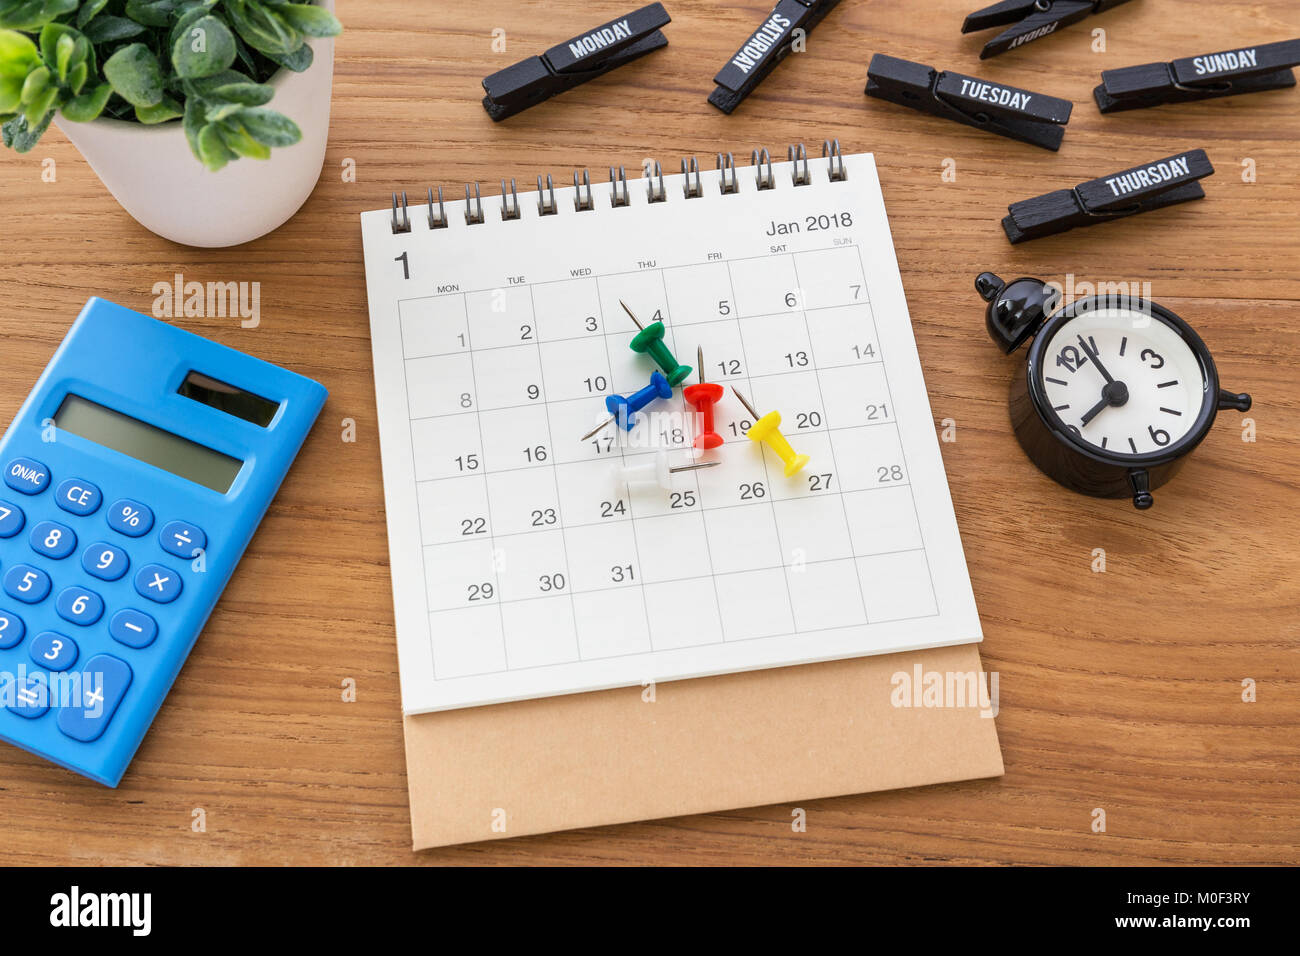 Calendar with pins on desk with clock and calculator Stock Photo